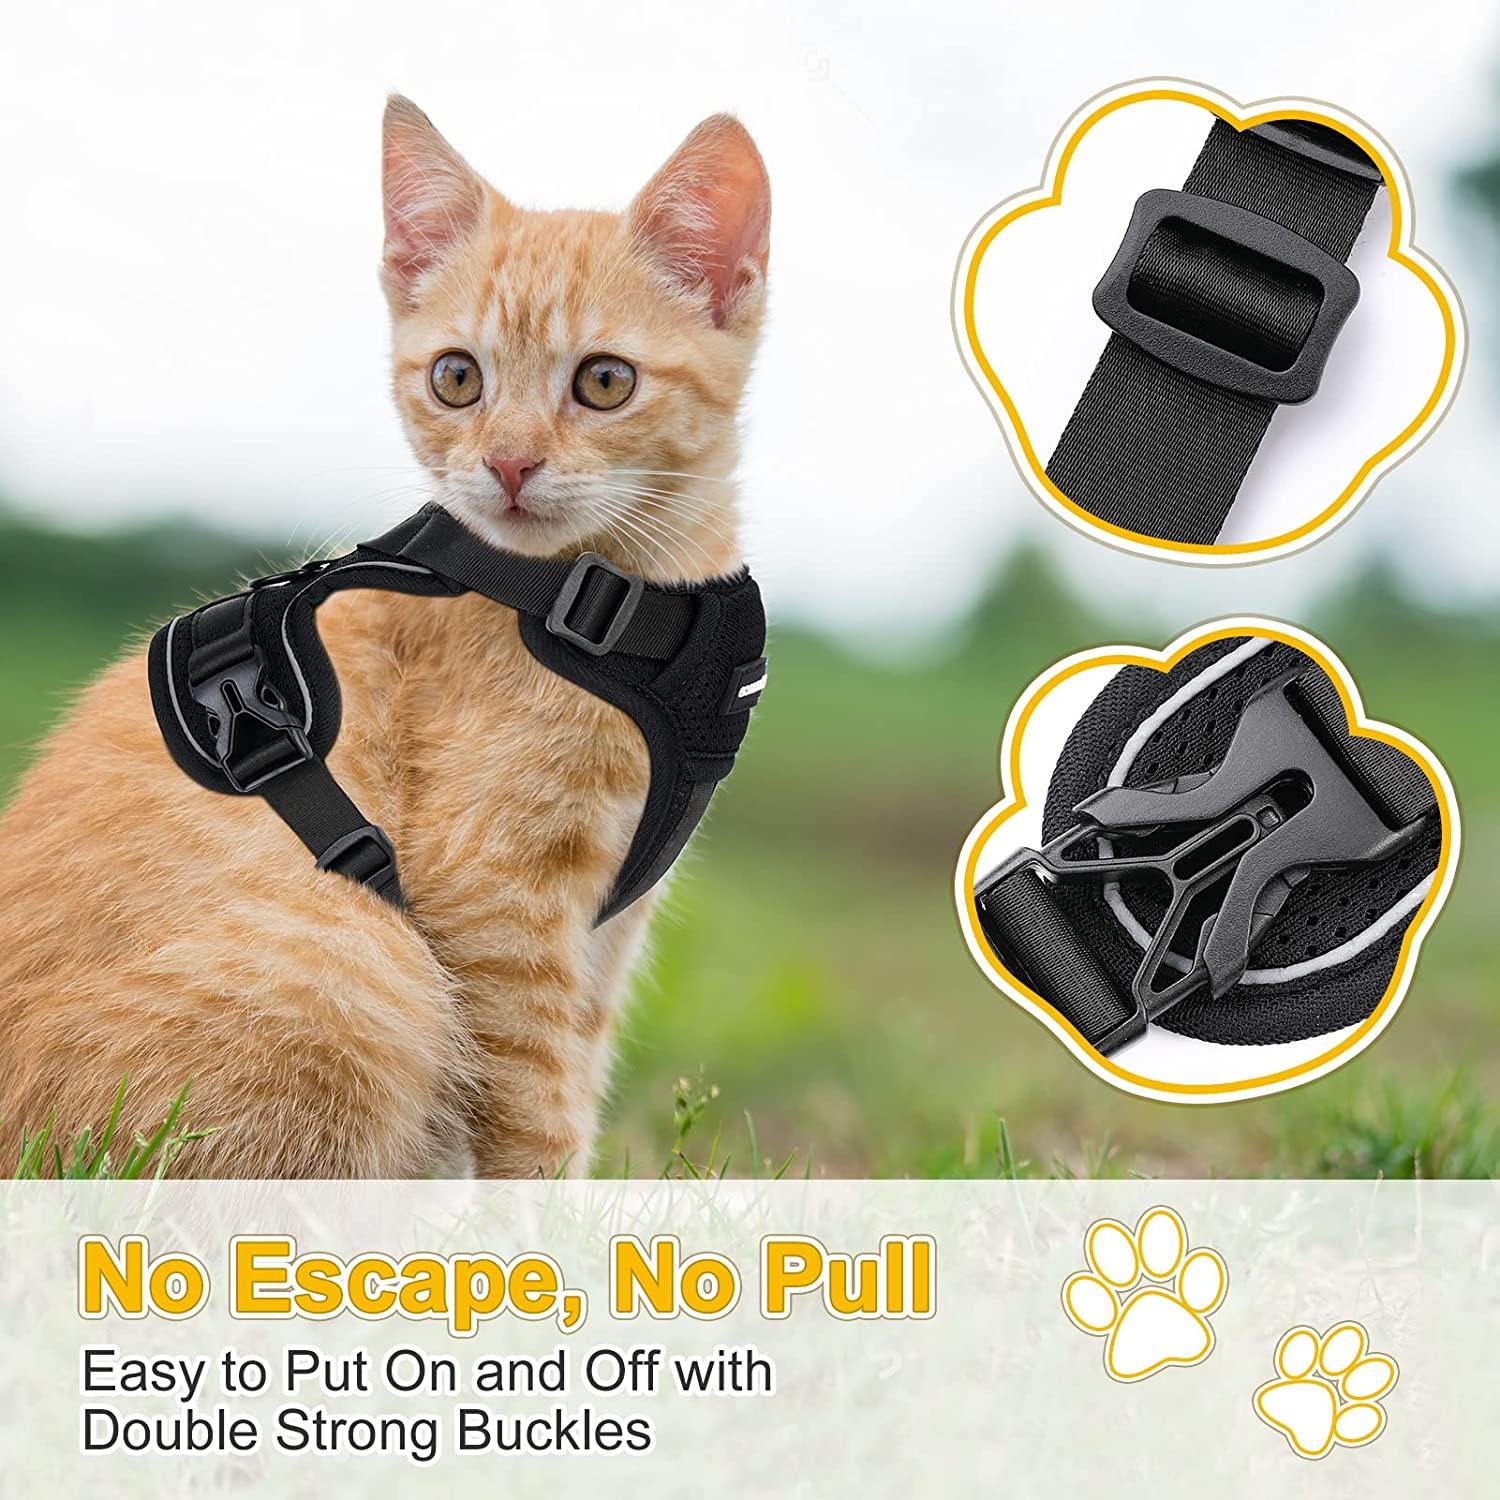 CatRomance Cat Harness Escape Proof, Breathable Mesh Cat Walking Harness,  Adjustable Cat Harness and Leash Set with Reflective Strips XS Black